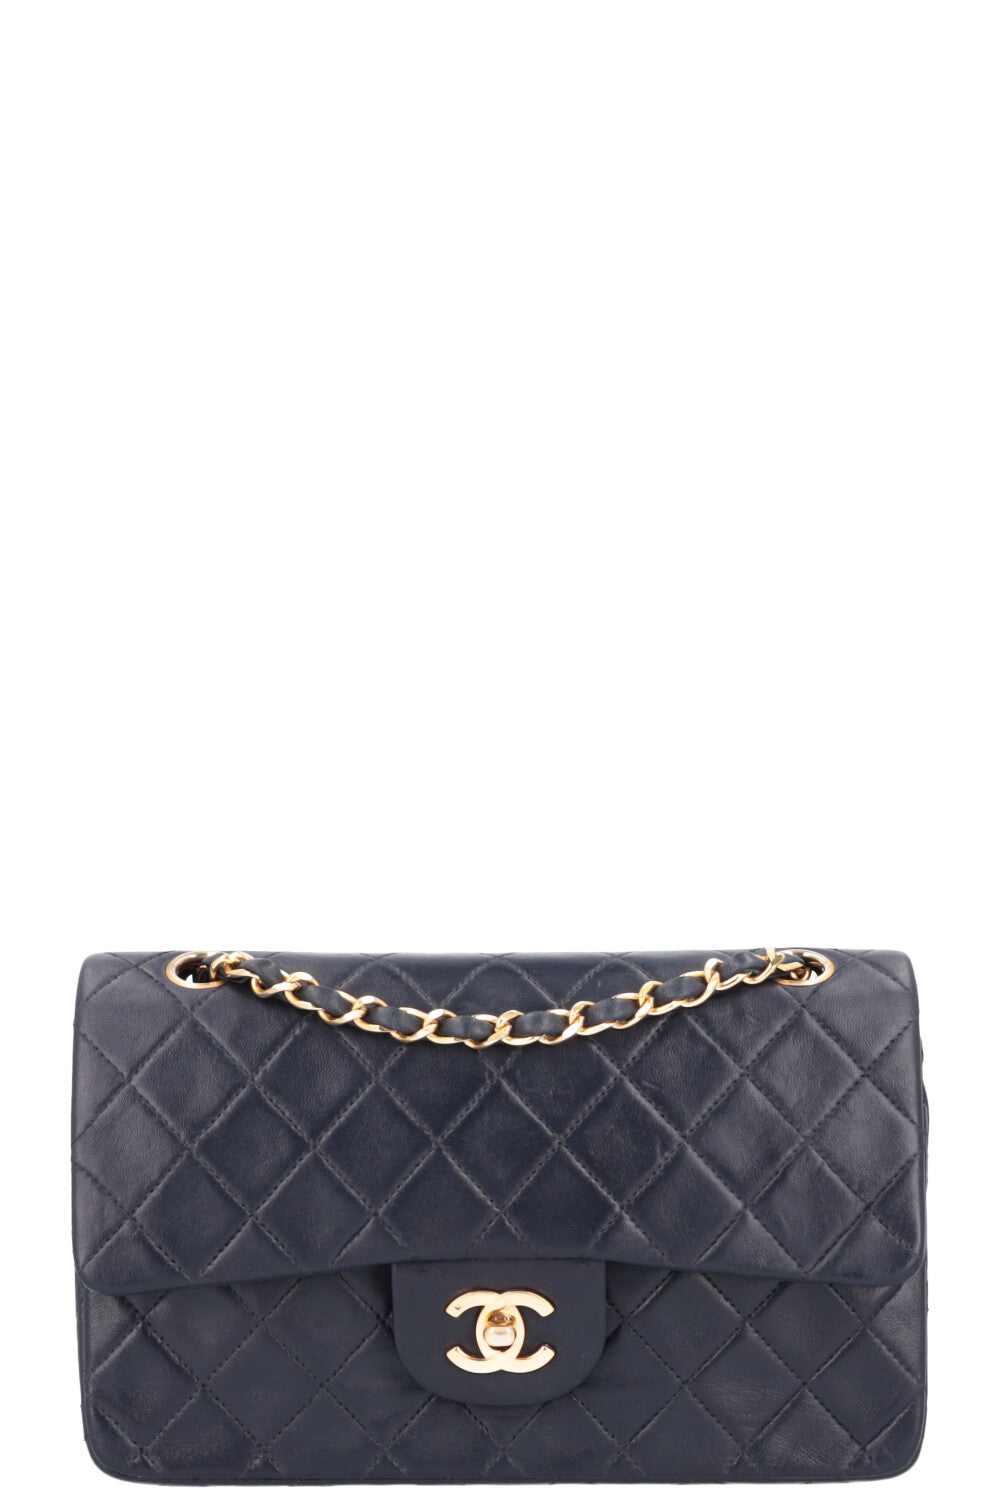 Chanel Vintage Double Flap Navy Gold